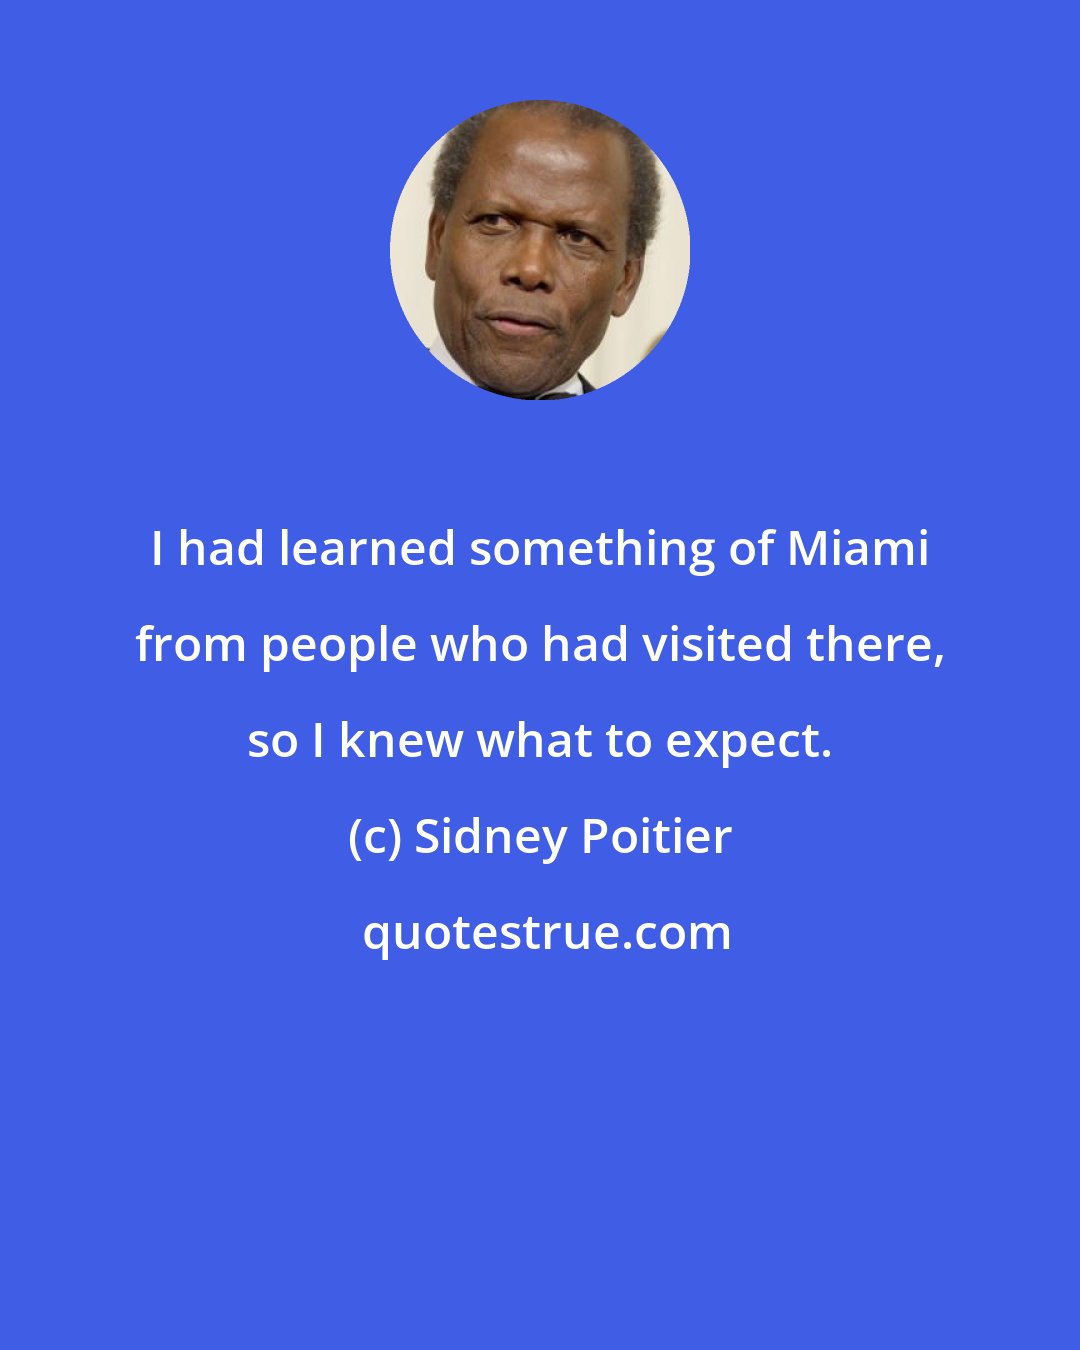 Sidney Poitier: I had learned something of Miami from people who had visited there, so I knew what to expect.